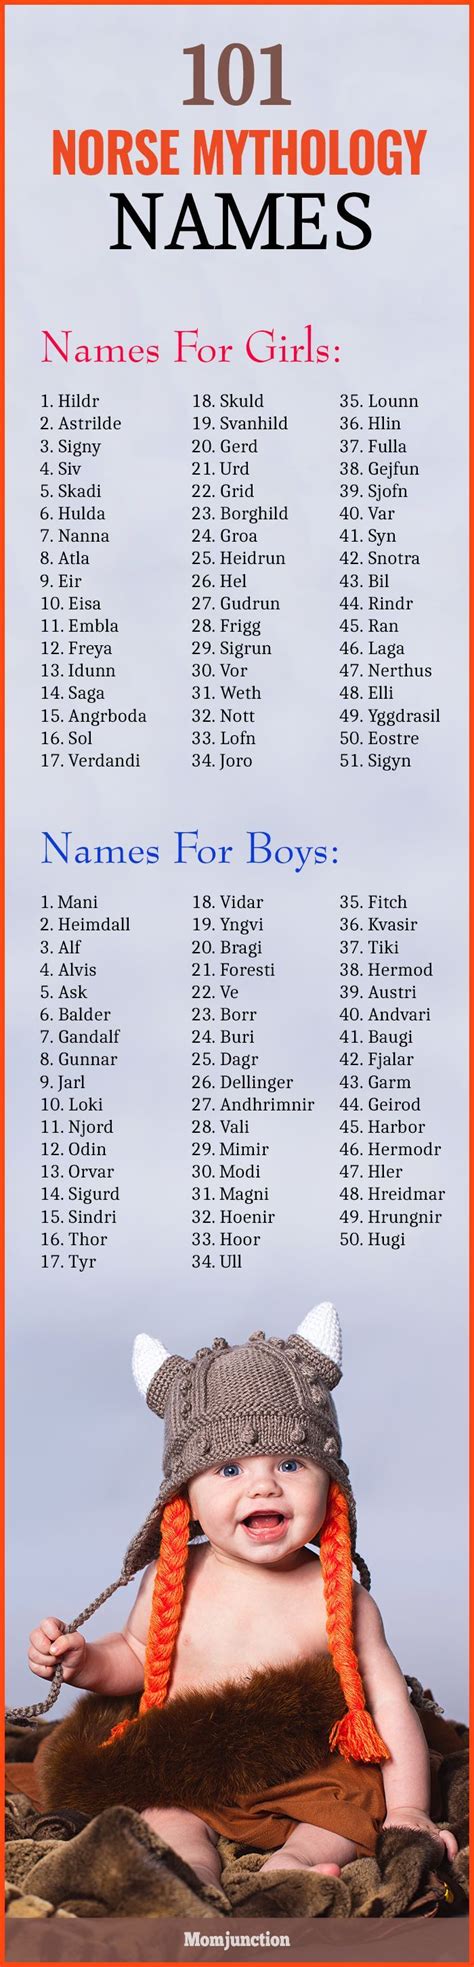 165 Best Images About Character Names On Pinterest Irish Baby Boy Or